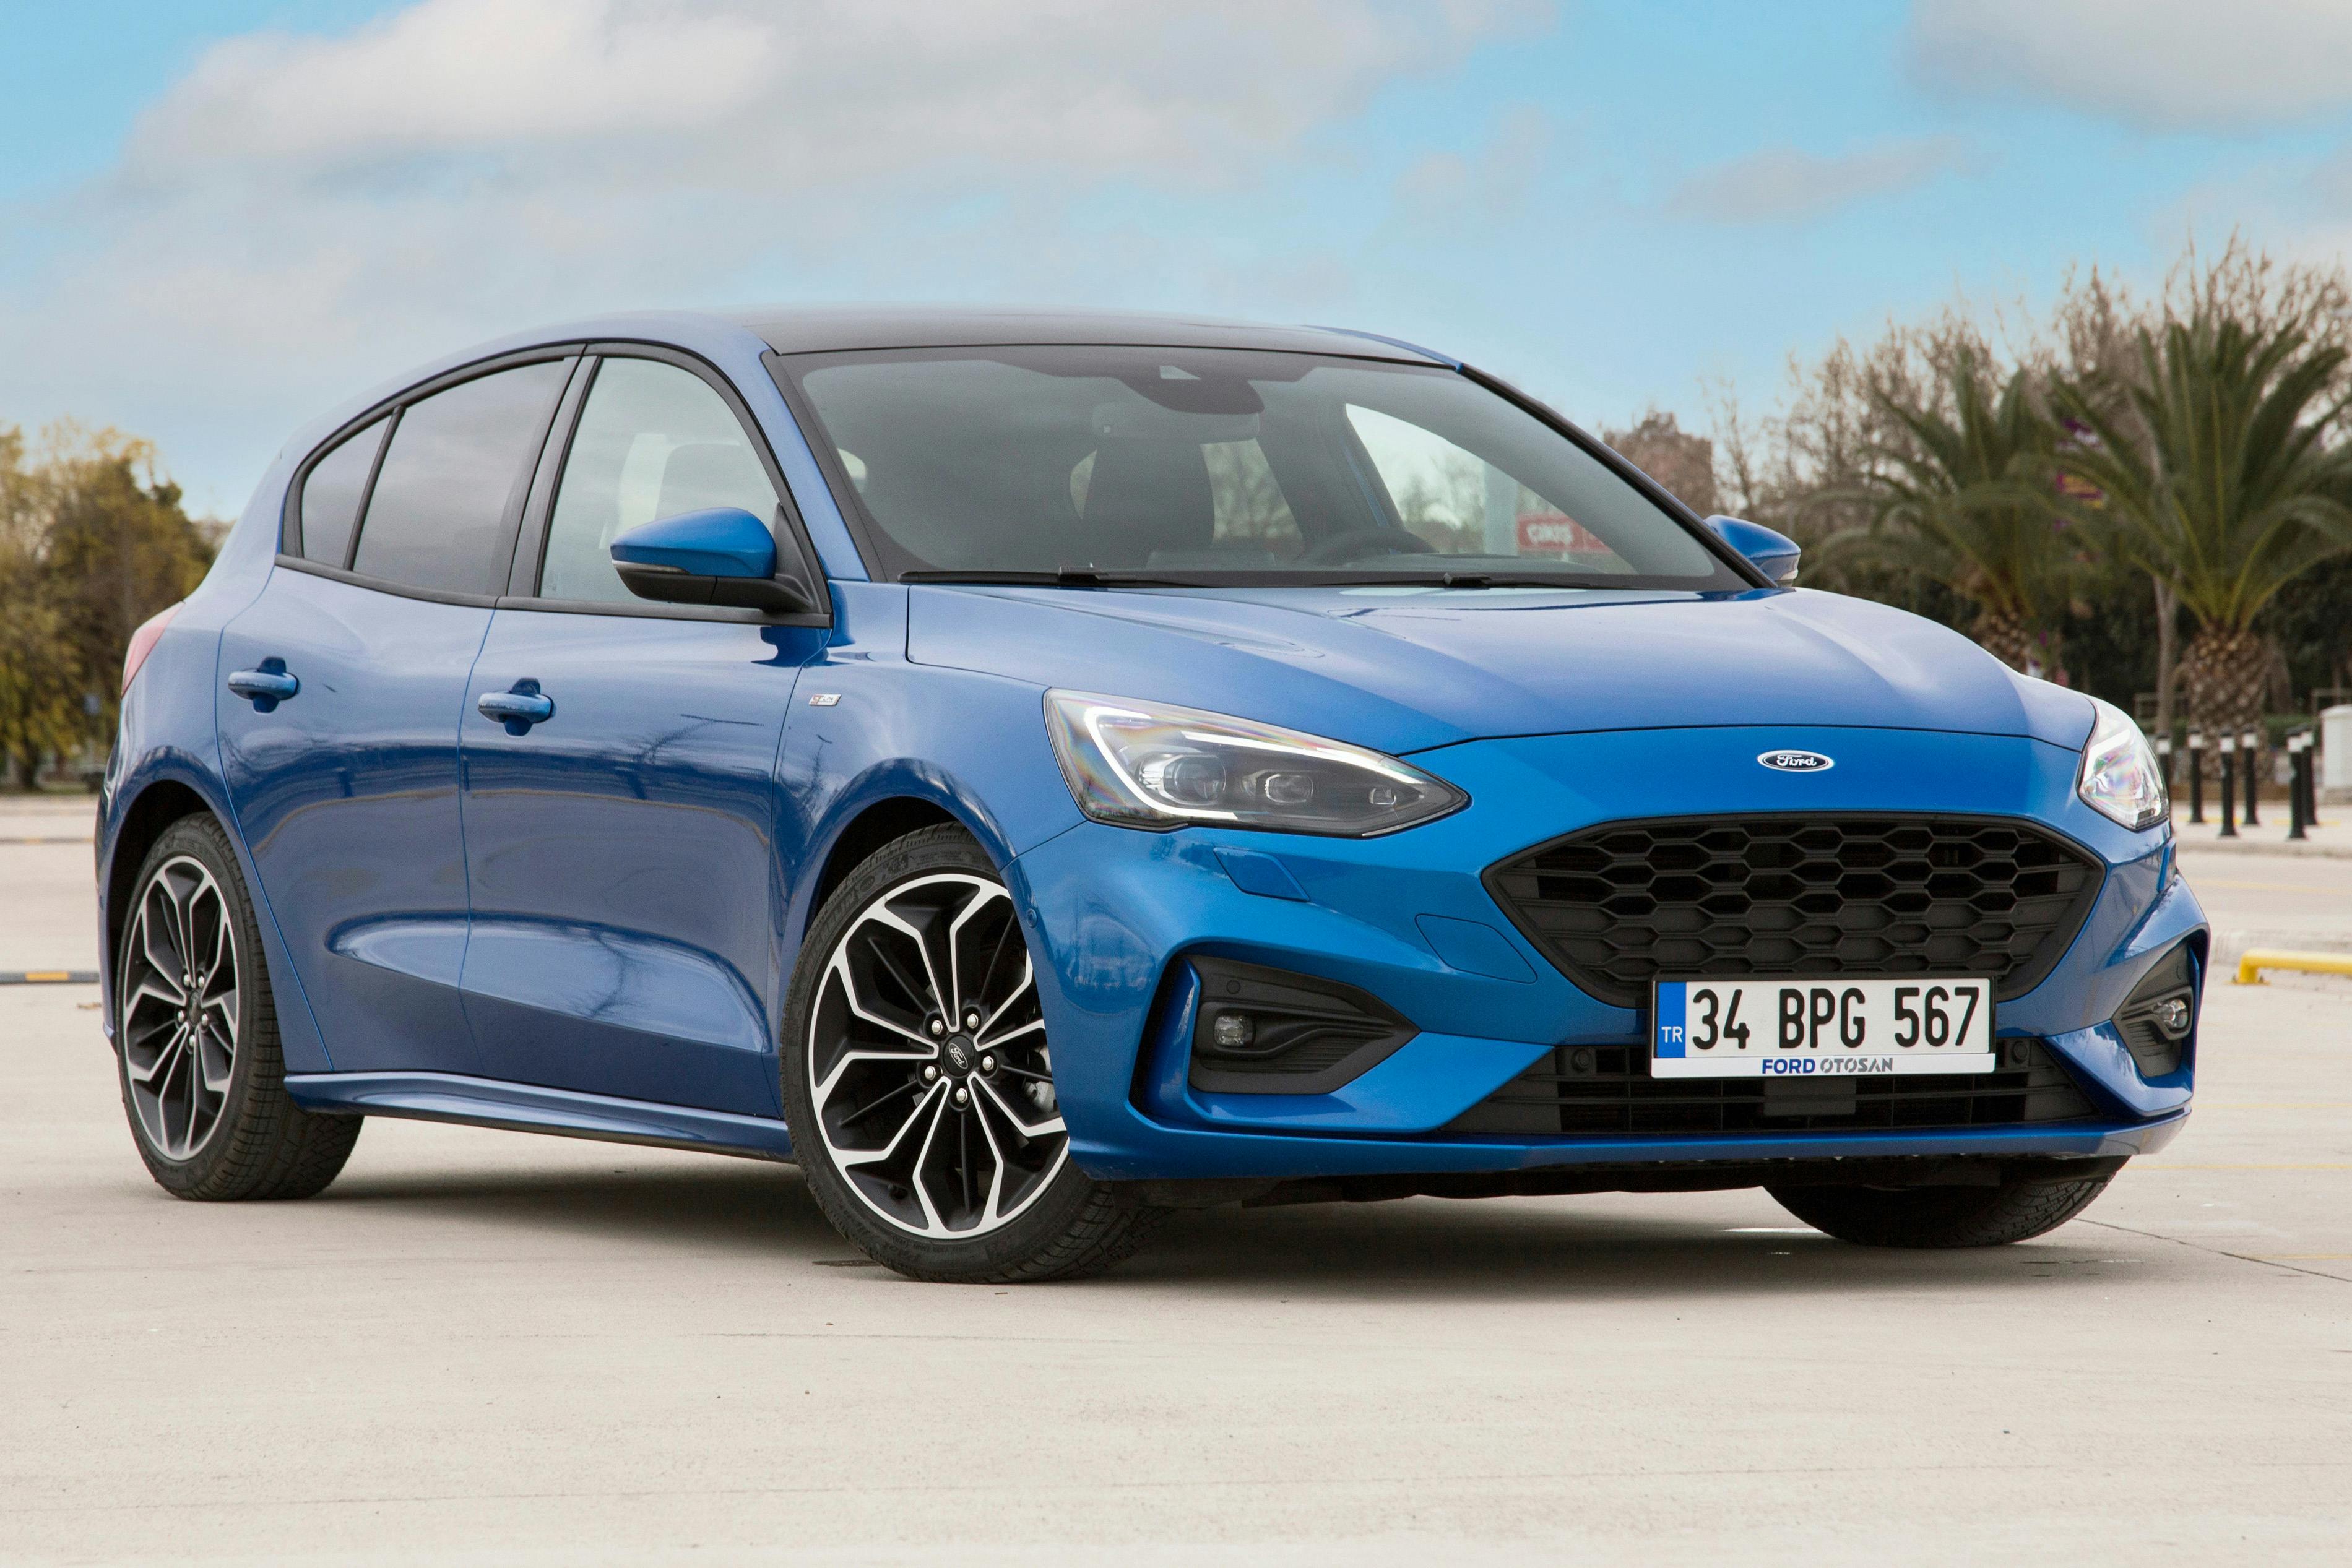 New Ford Focus is a compact car manufactured by the Ford Motor Company.